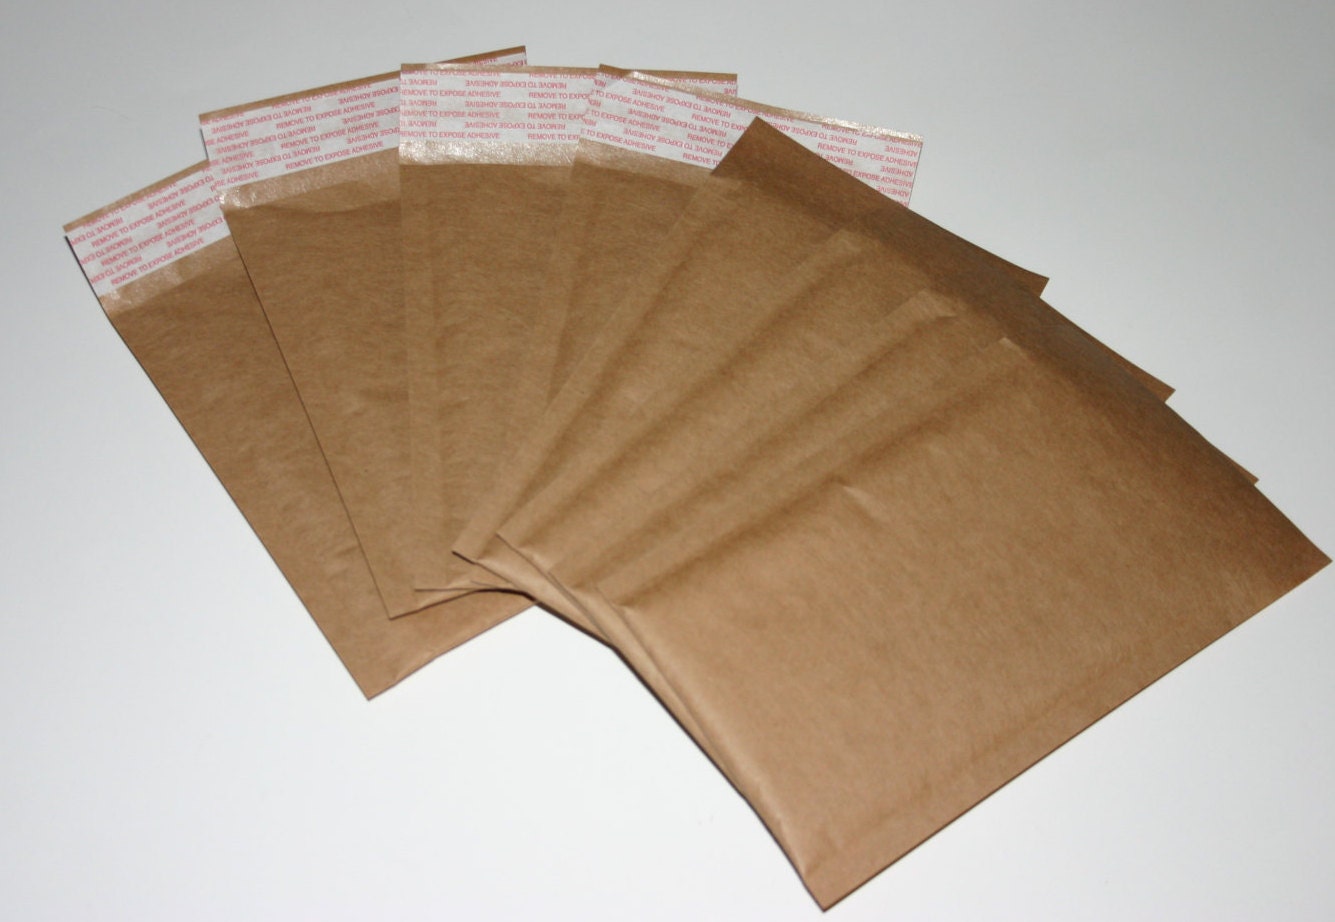 100 Eco Friendly Size 000 4x8 Extra Lightweight Brown Kraft Bubble Mailers Self Sealing Padded 1587